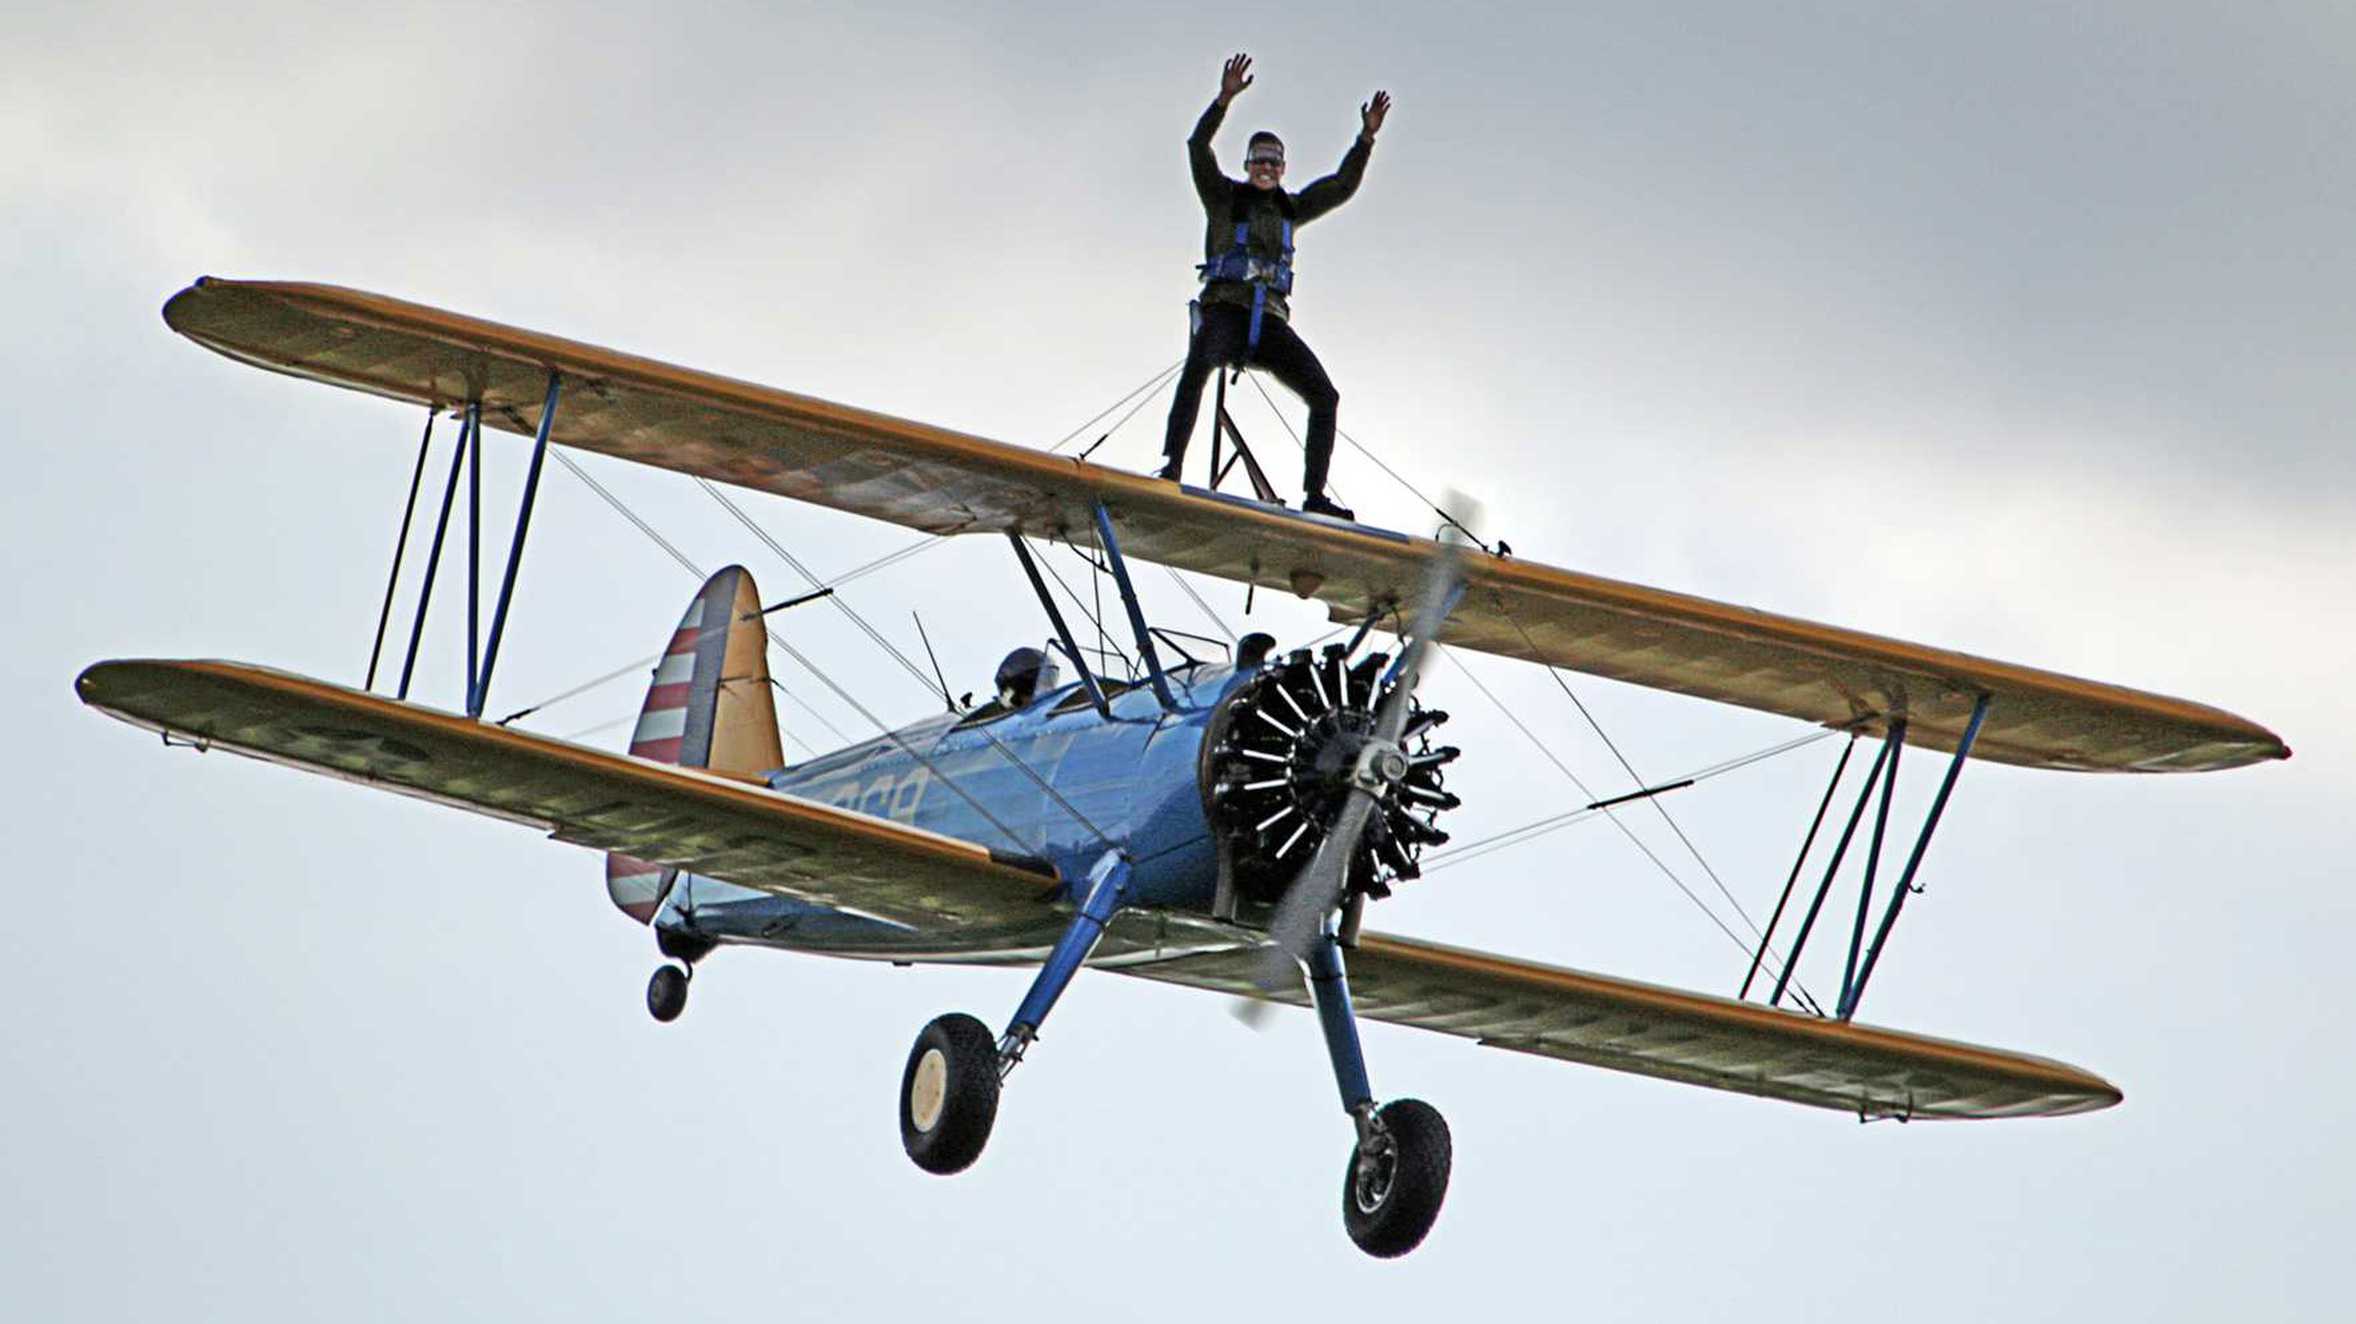 An intrepid supporter smiling while strapped to the wing of an airborne bi-plane.